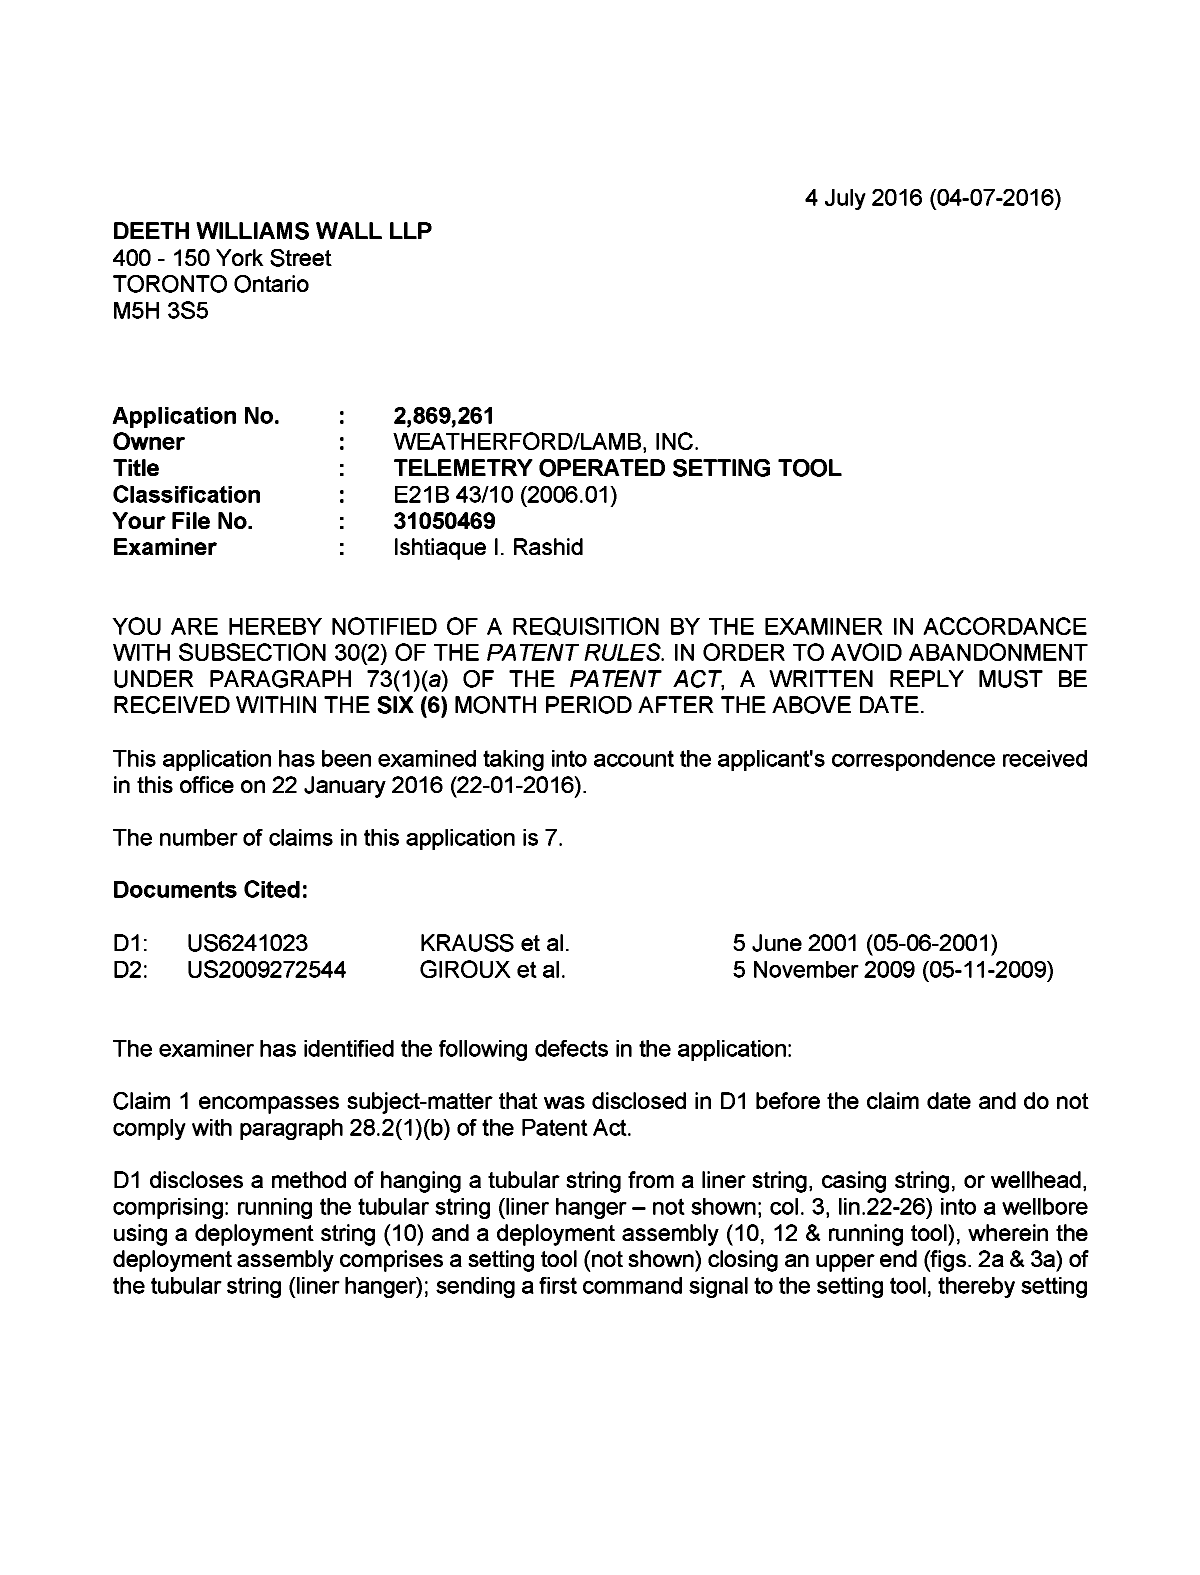 Canadian Patent Document 2869261. Examiner Requisition 20160704. Image 1 of 3